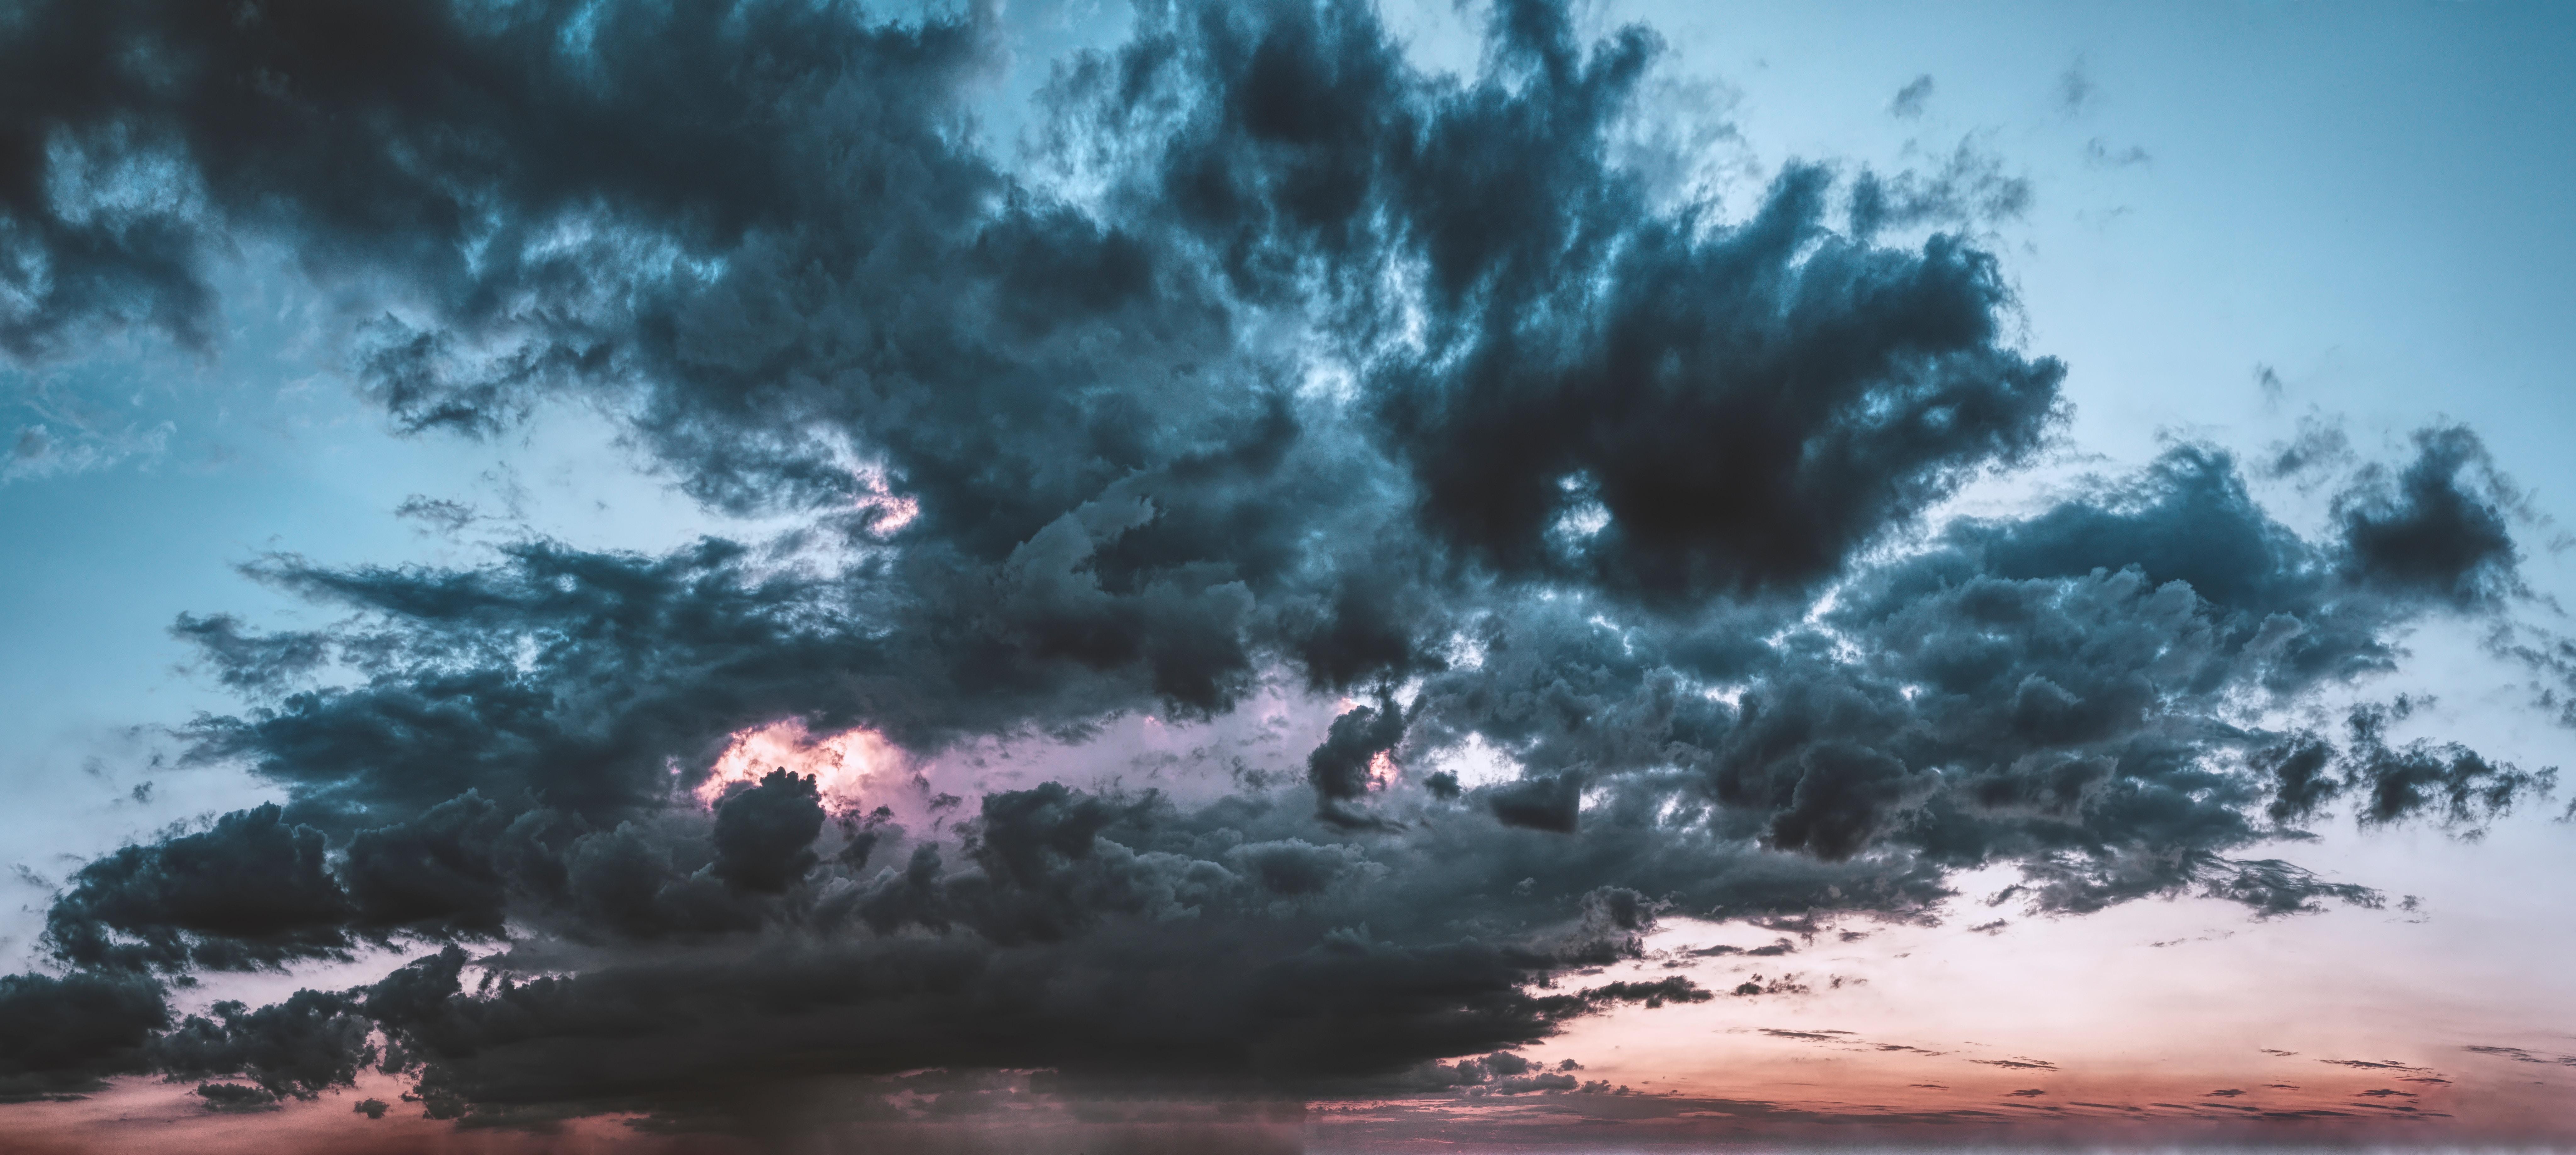 8192x3672 #Free image, #storm, #outdoors, #moody